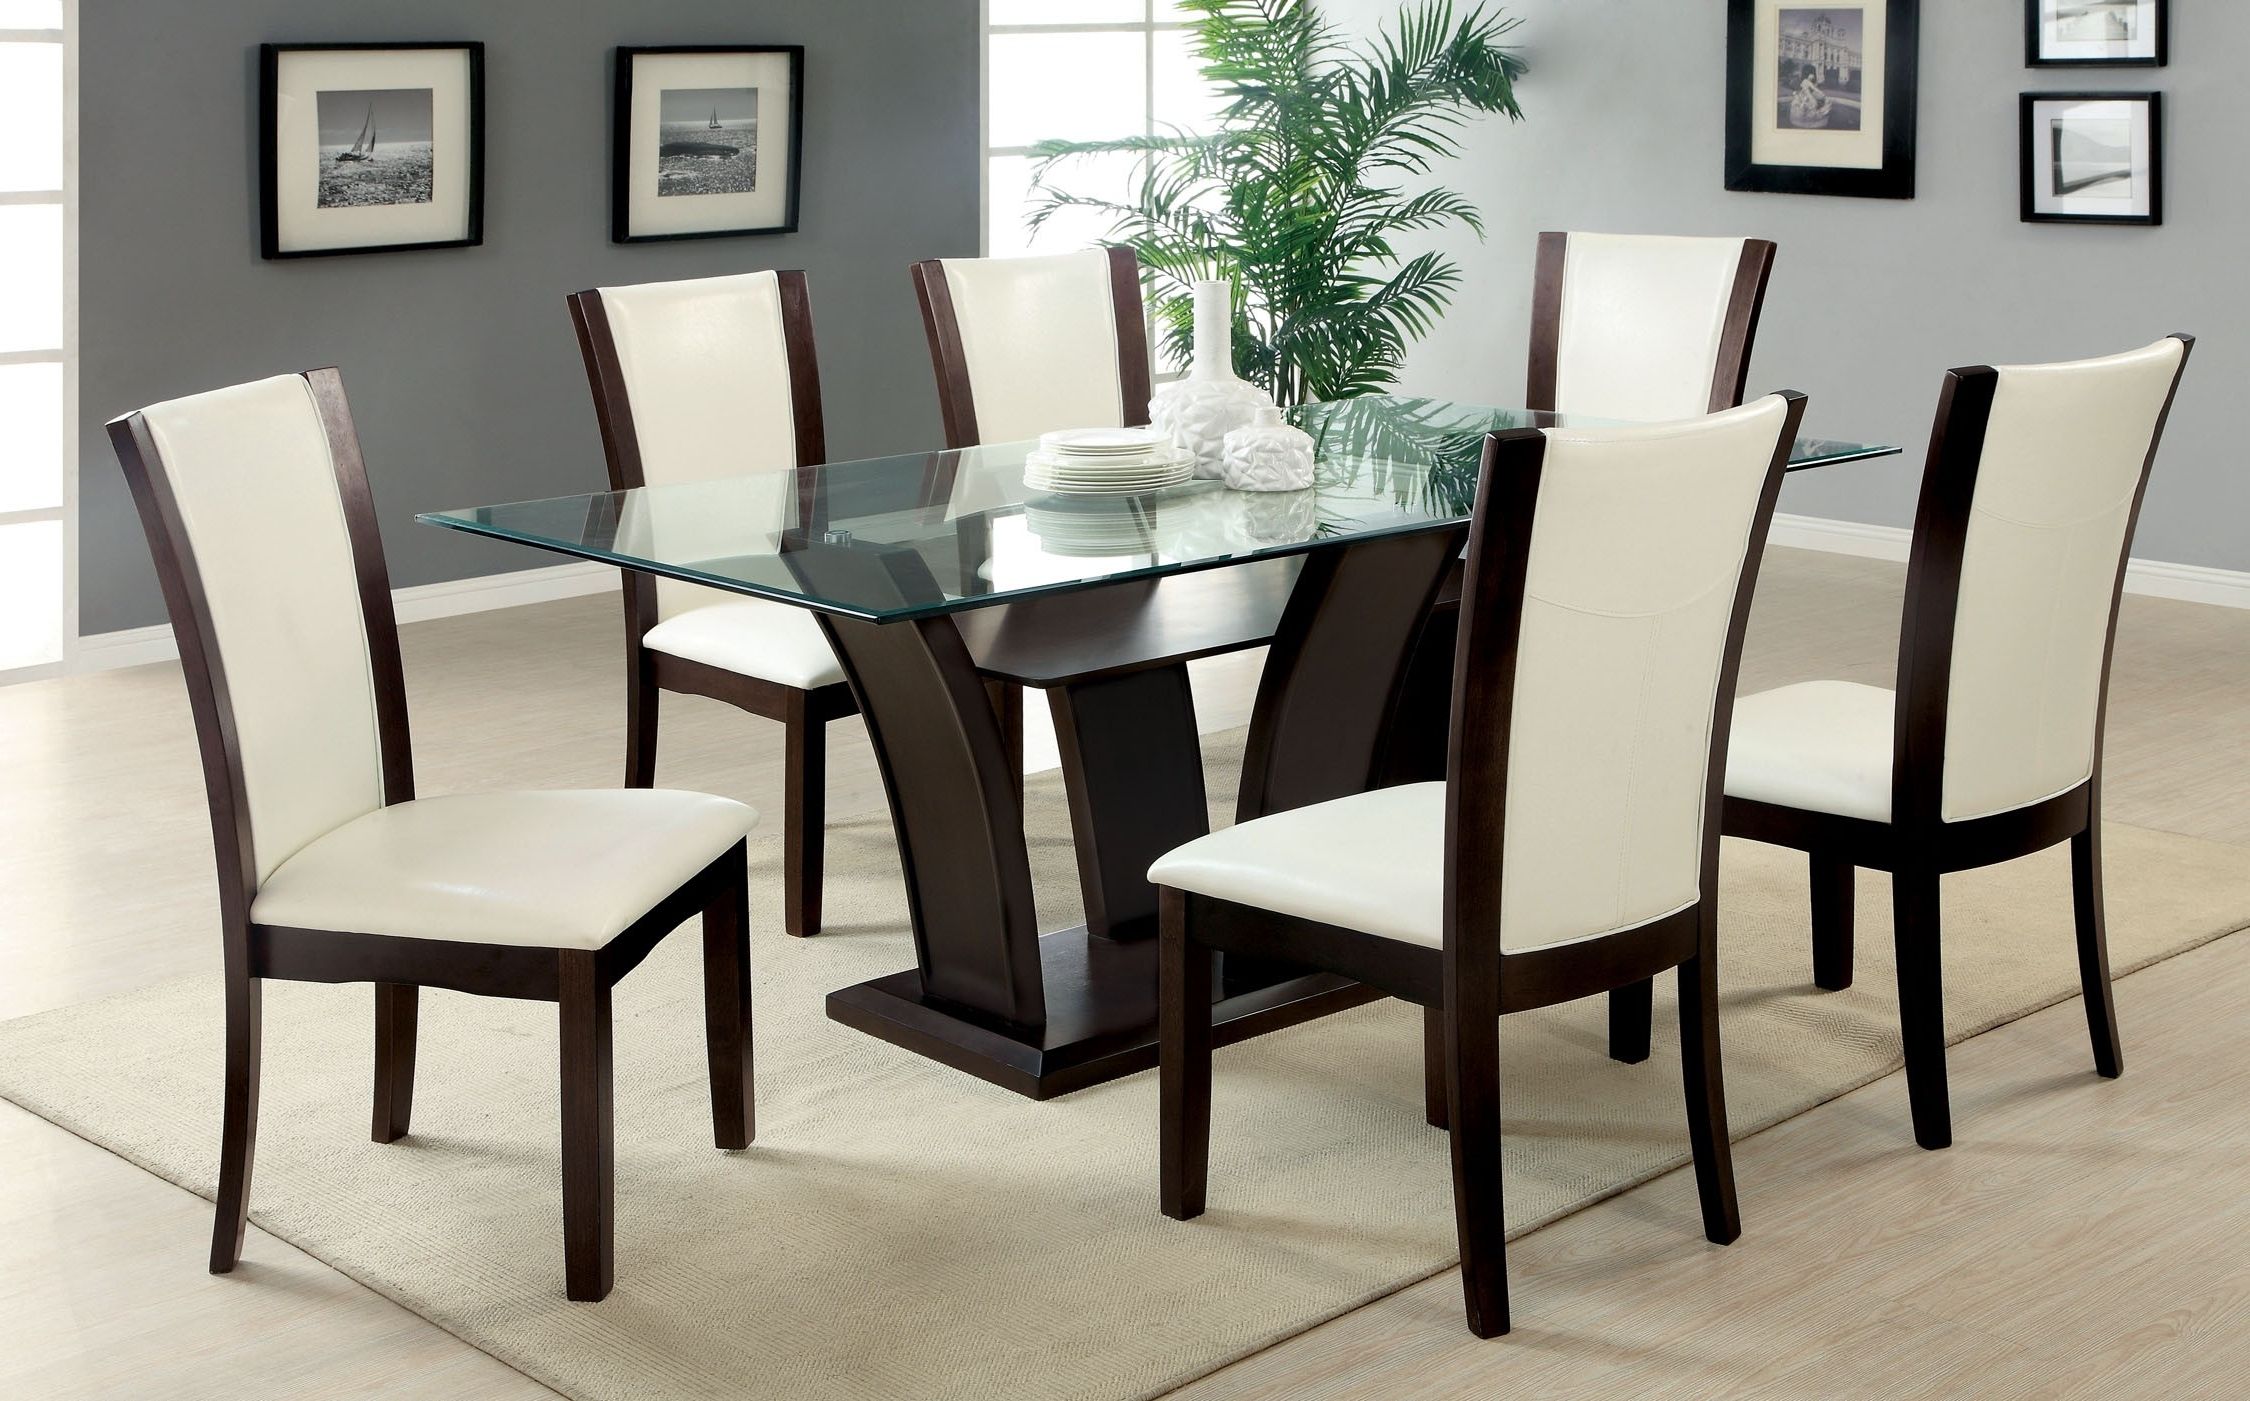 Glass Dining Tables And 6 Chairs Within Most Up To Date Glass Dining Table Sets 6 Chairs • Table Setting Ideas (View 1 of 25)